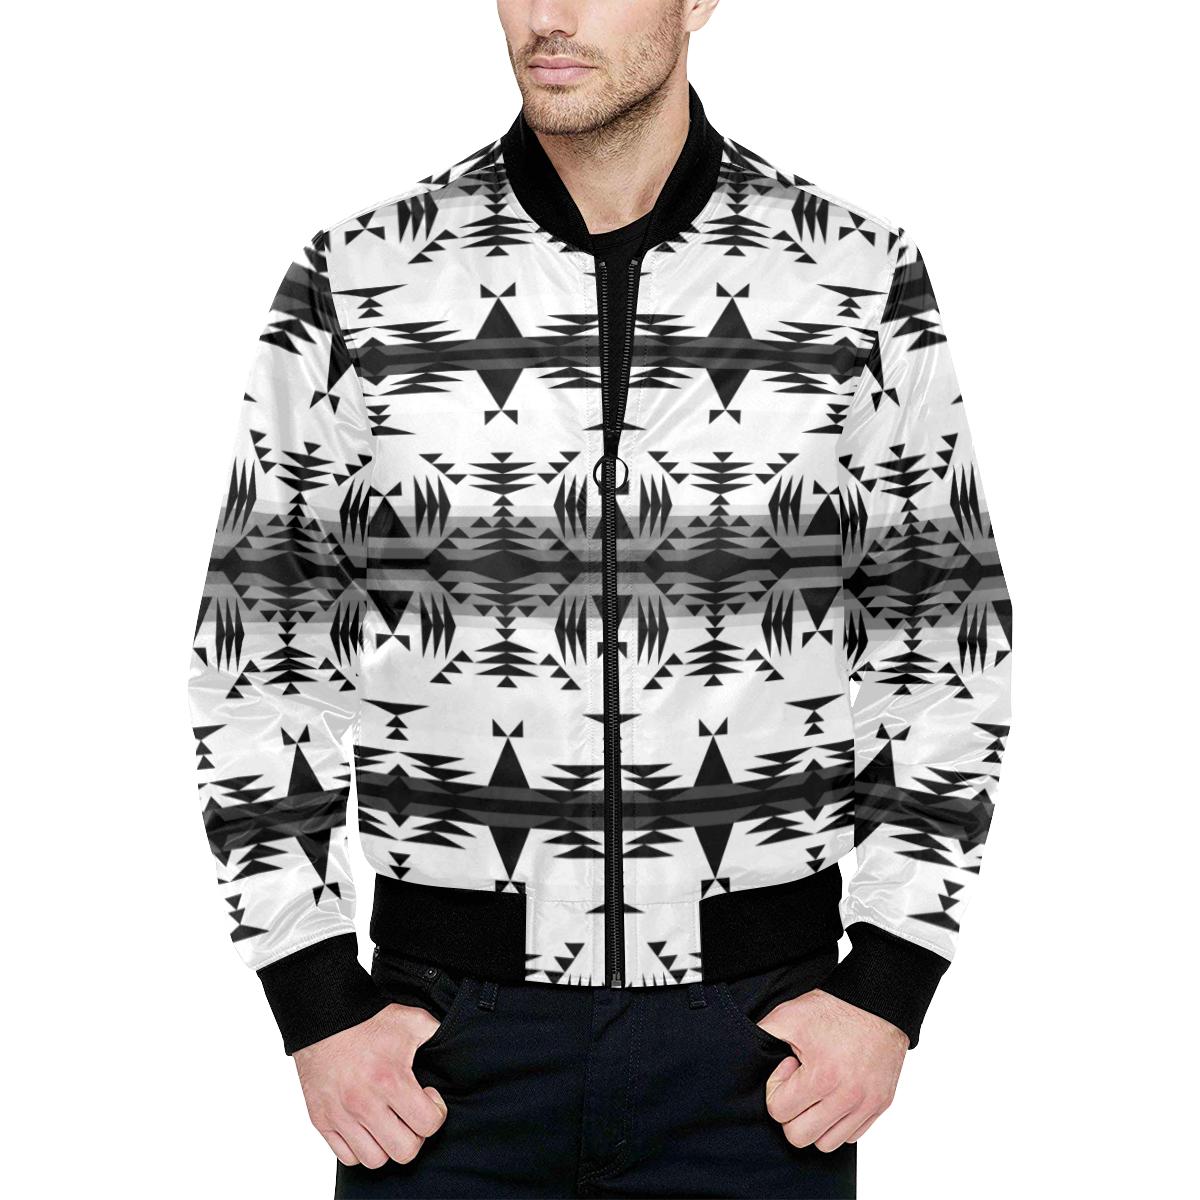 Between the Mountains White and Black Men's Heavy Bomber Jacket with Q ...